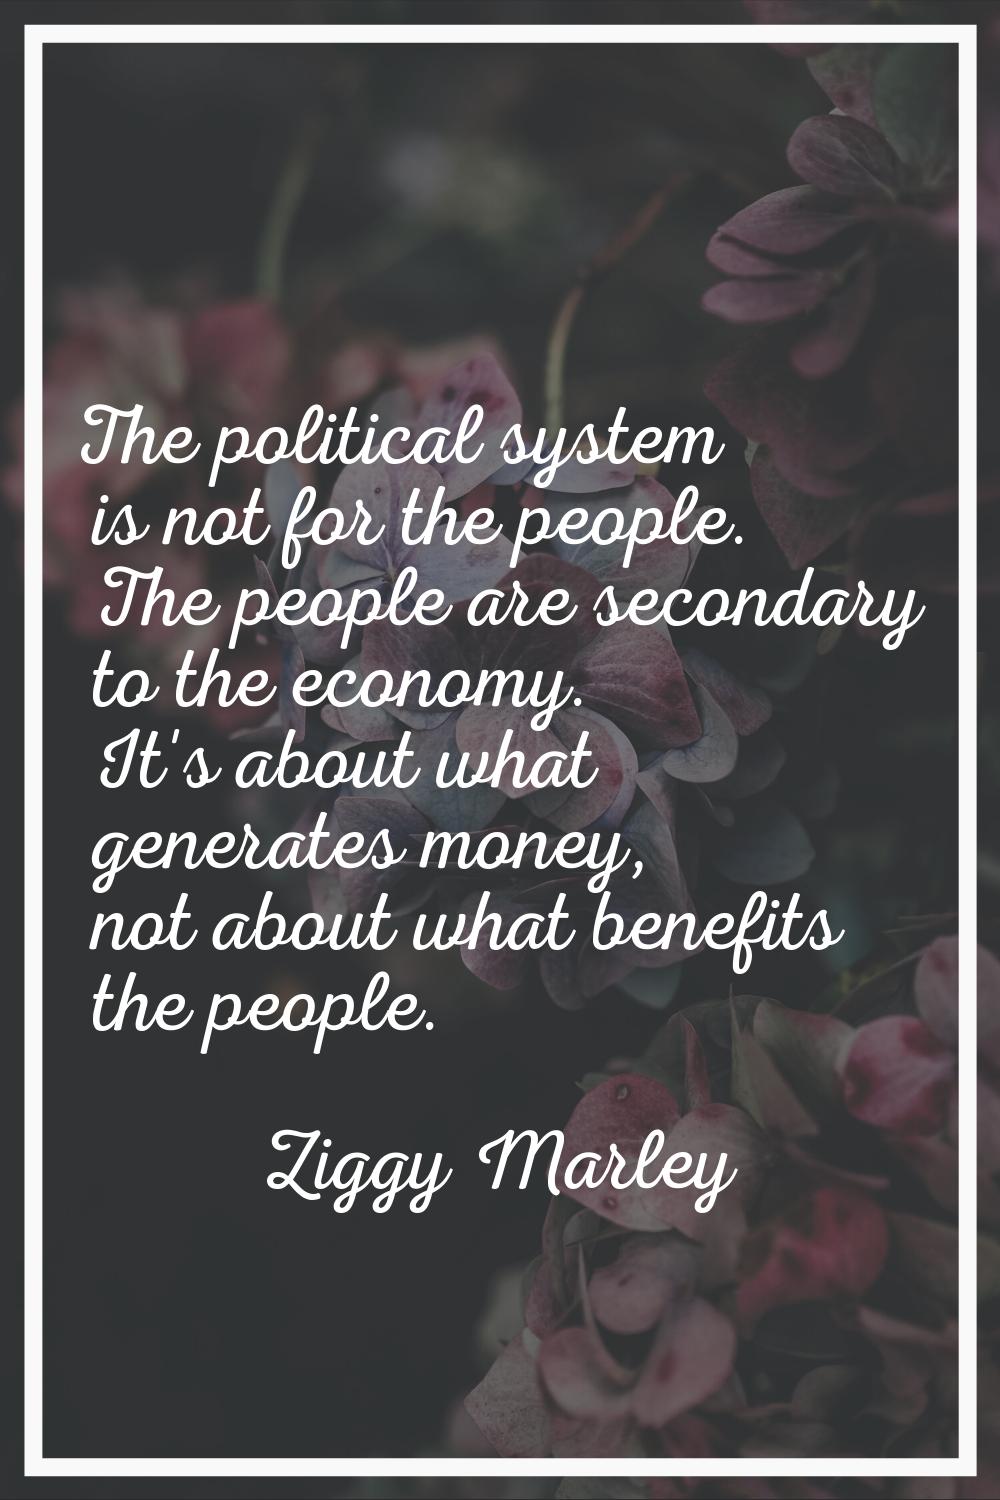 The political system is not for the people. The people are secondary to the economy. It's about wha